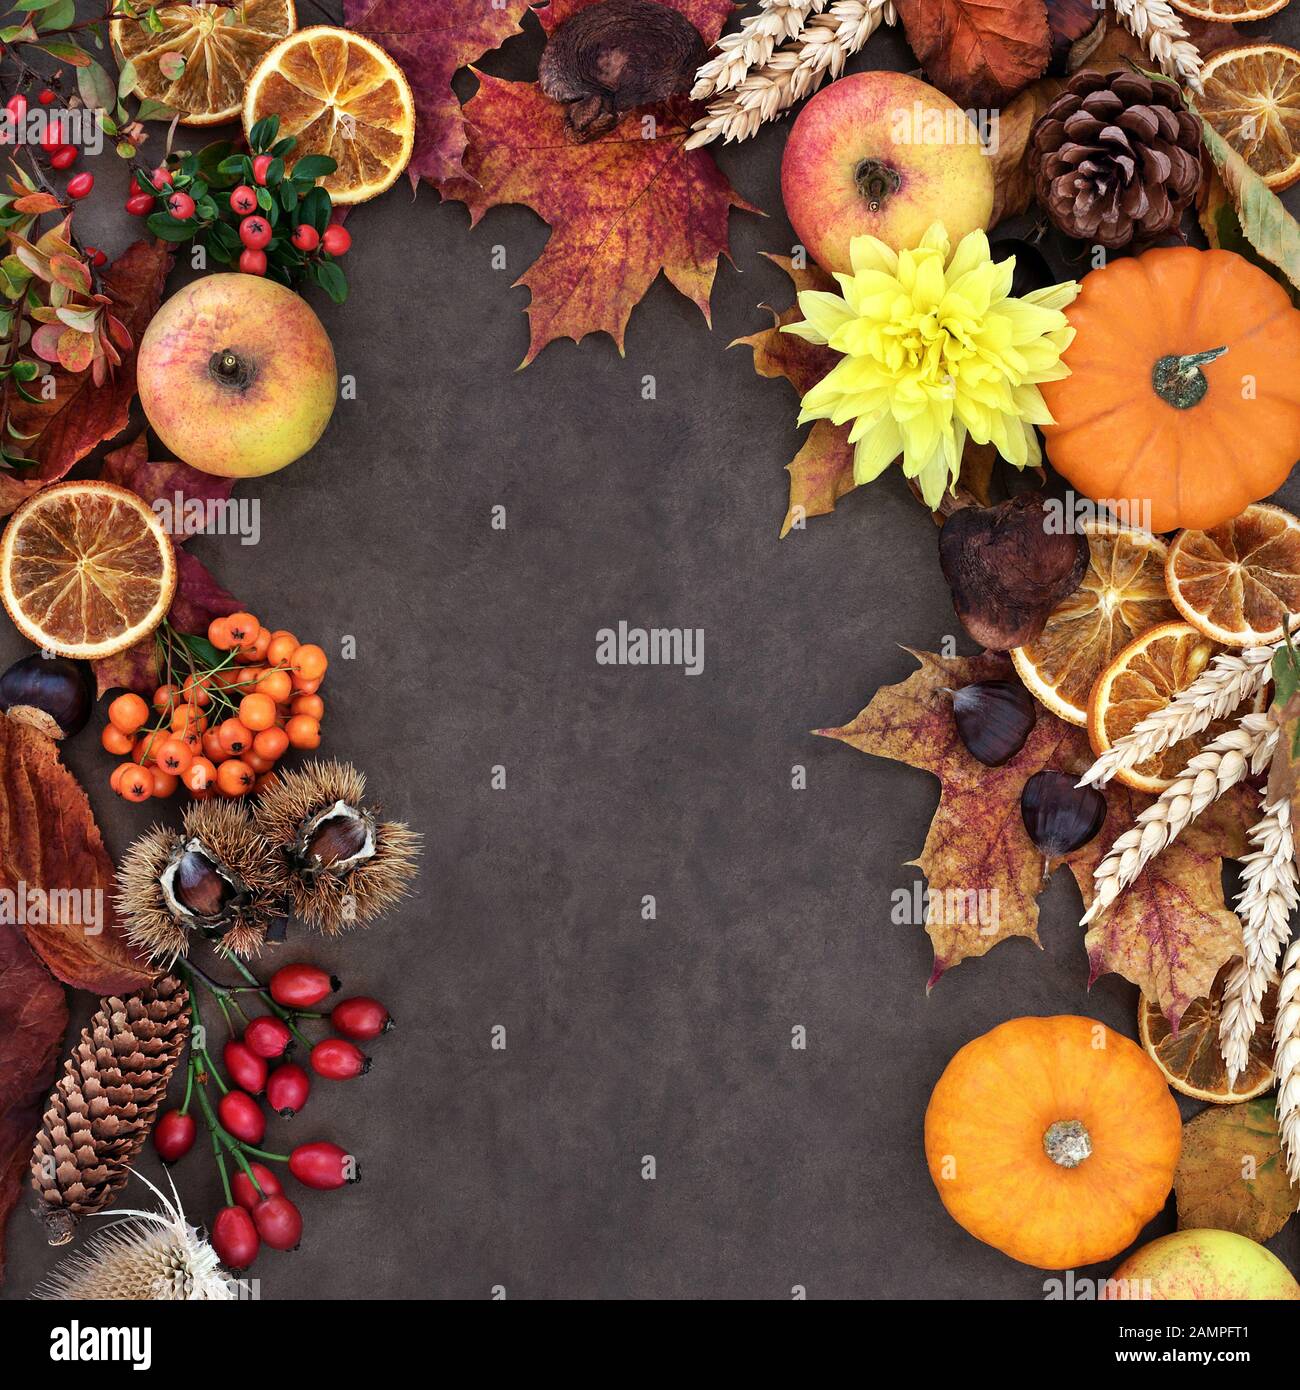 Autumn background border with food, flowers and leaves on lokta background. Harvest festival theme. Top view. Stock Photo